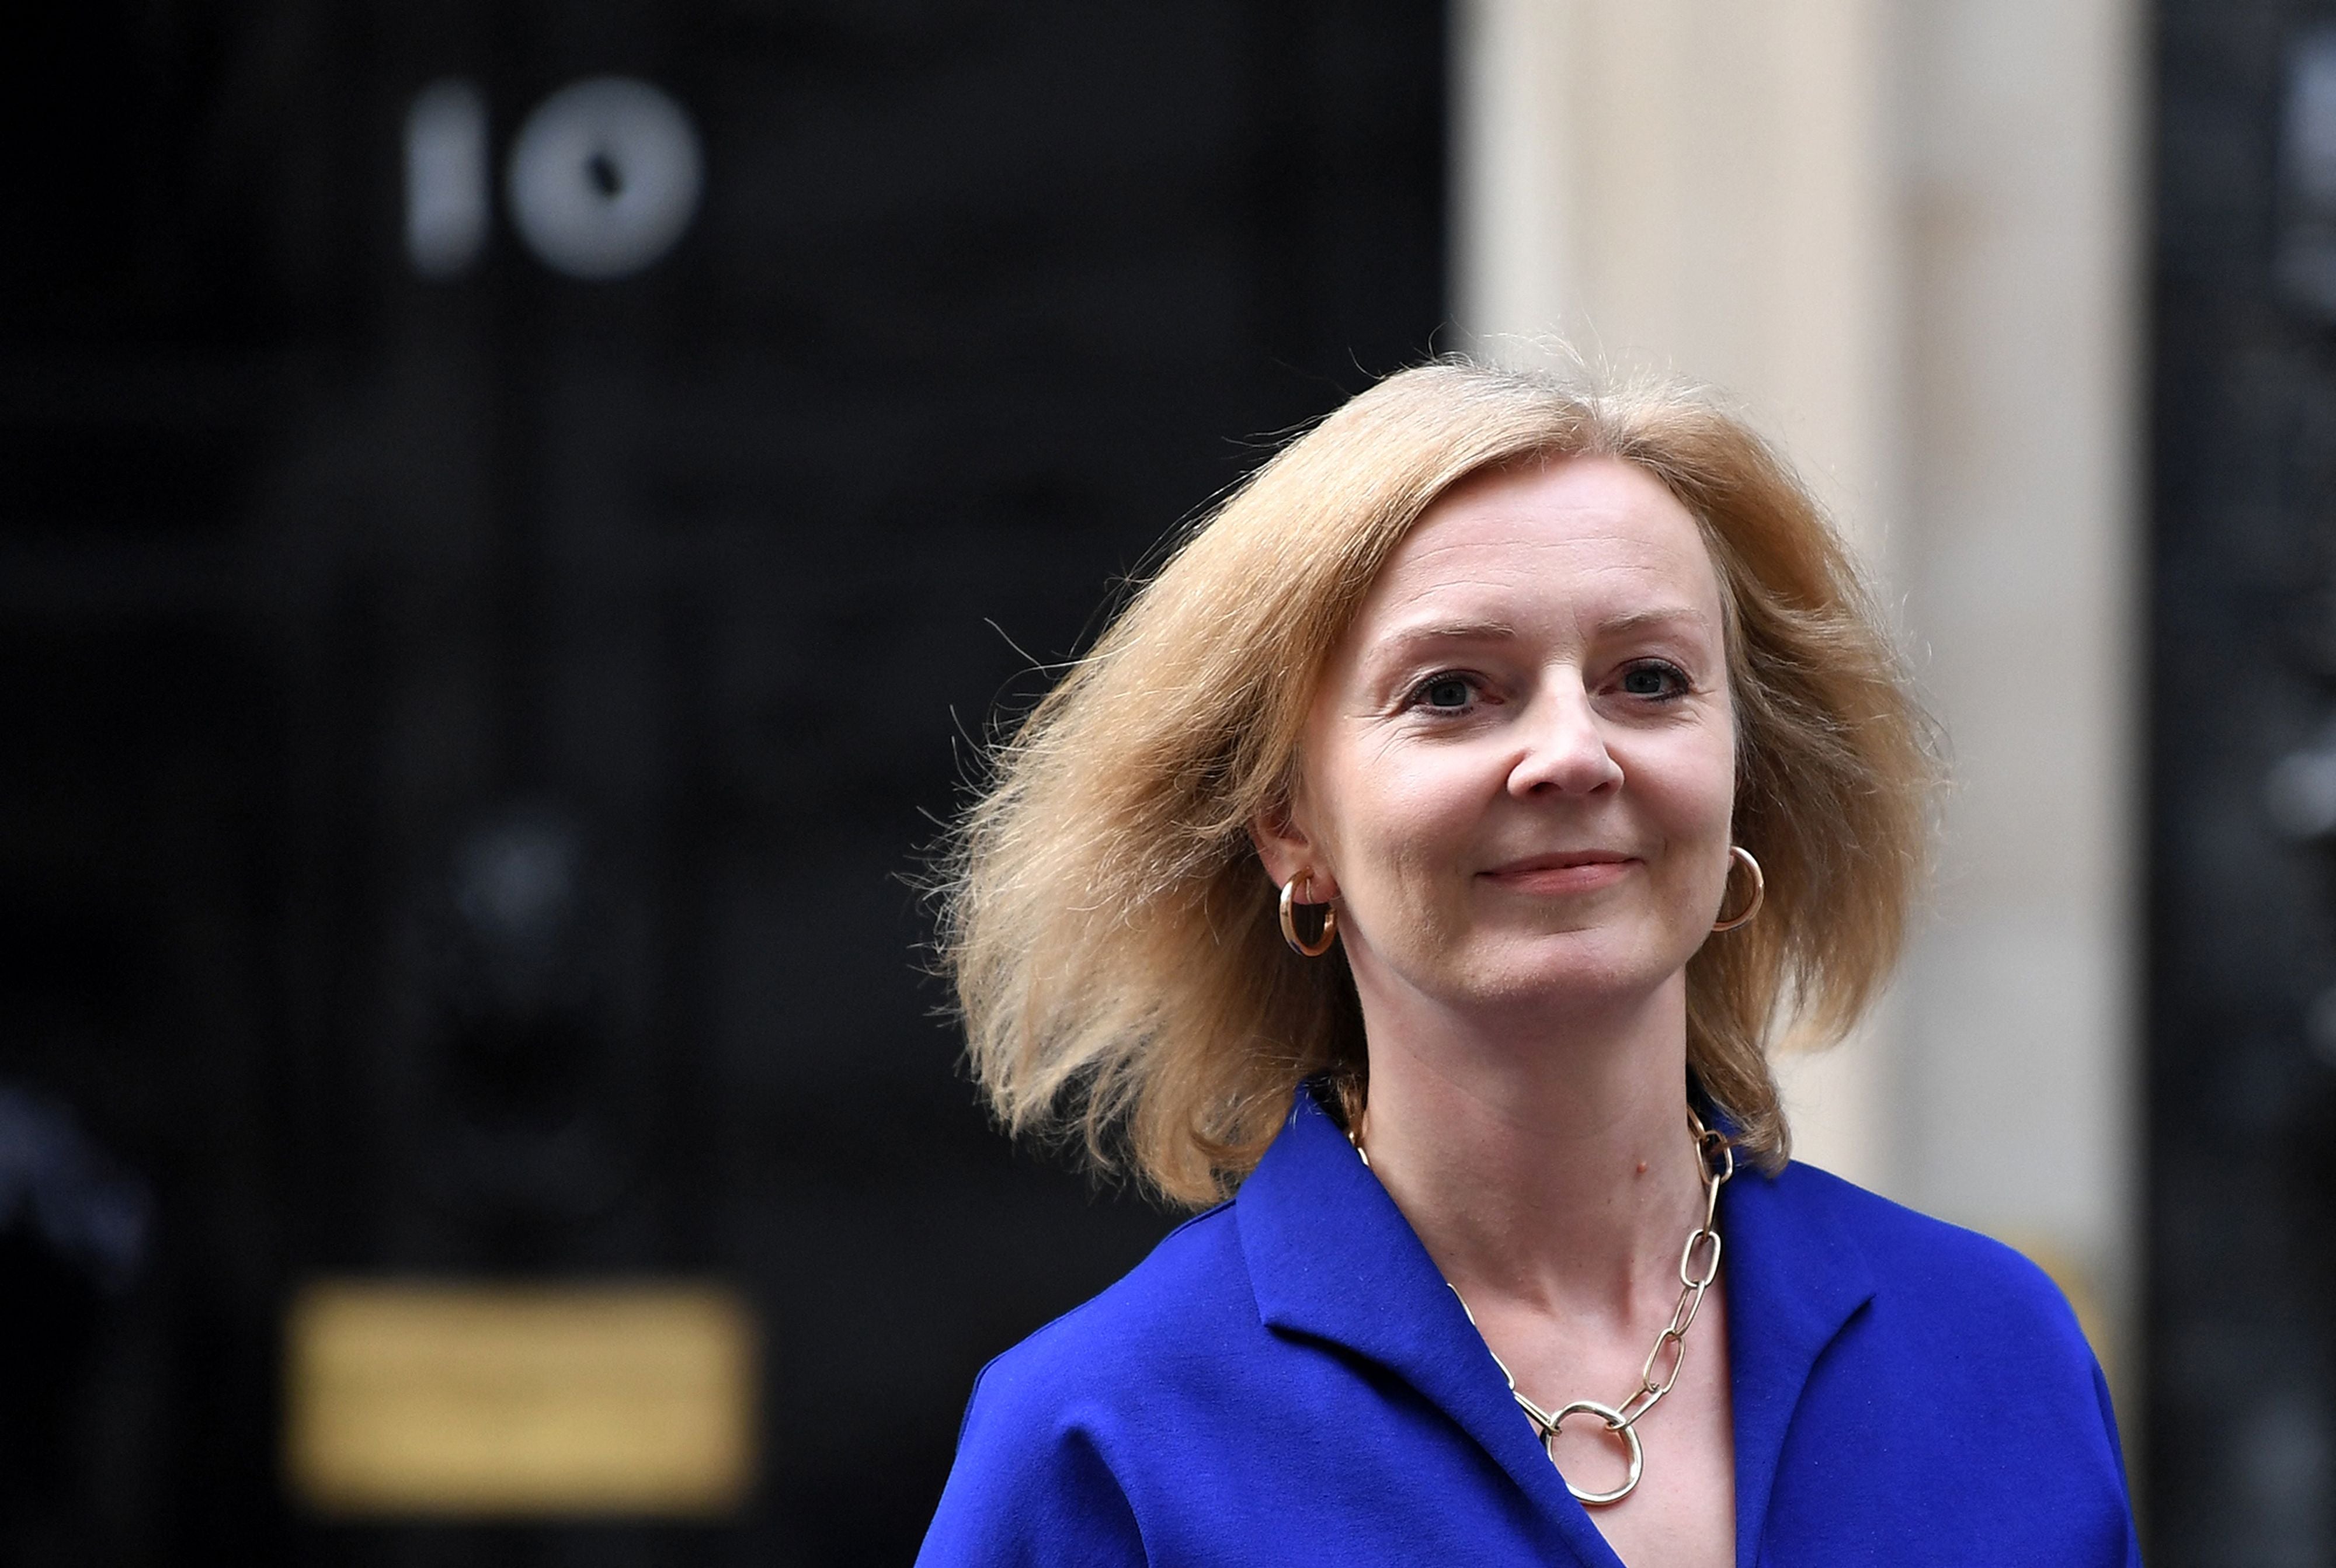 Liz Truss will make her campaign pitch on Thursday